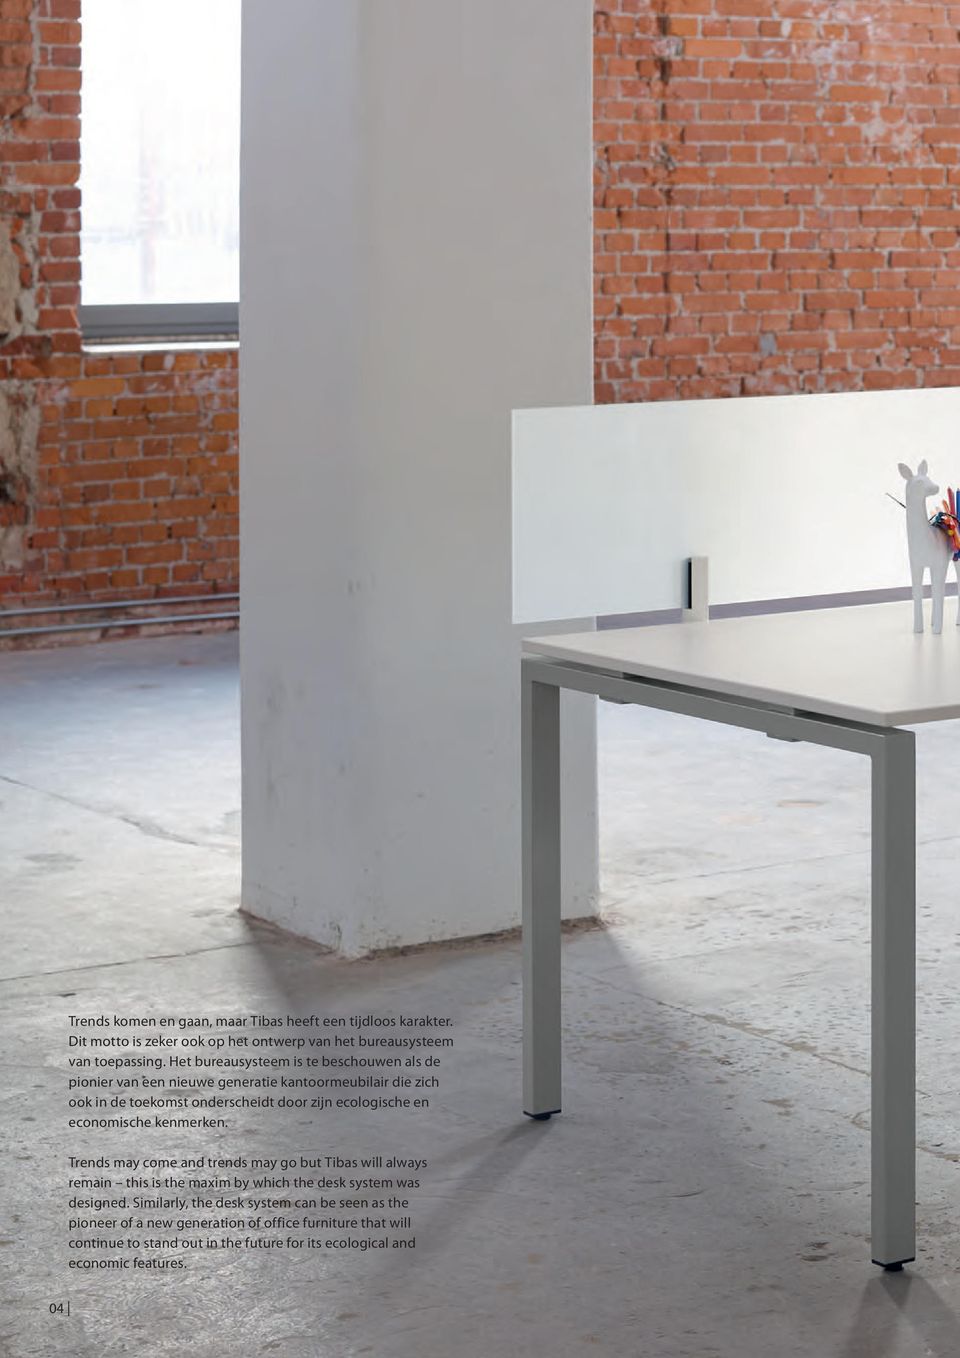 en economische kenmerken. Trends may come and trends may go but Tibas will always remain this is the maxim by which the desk system was designed.